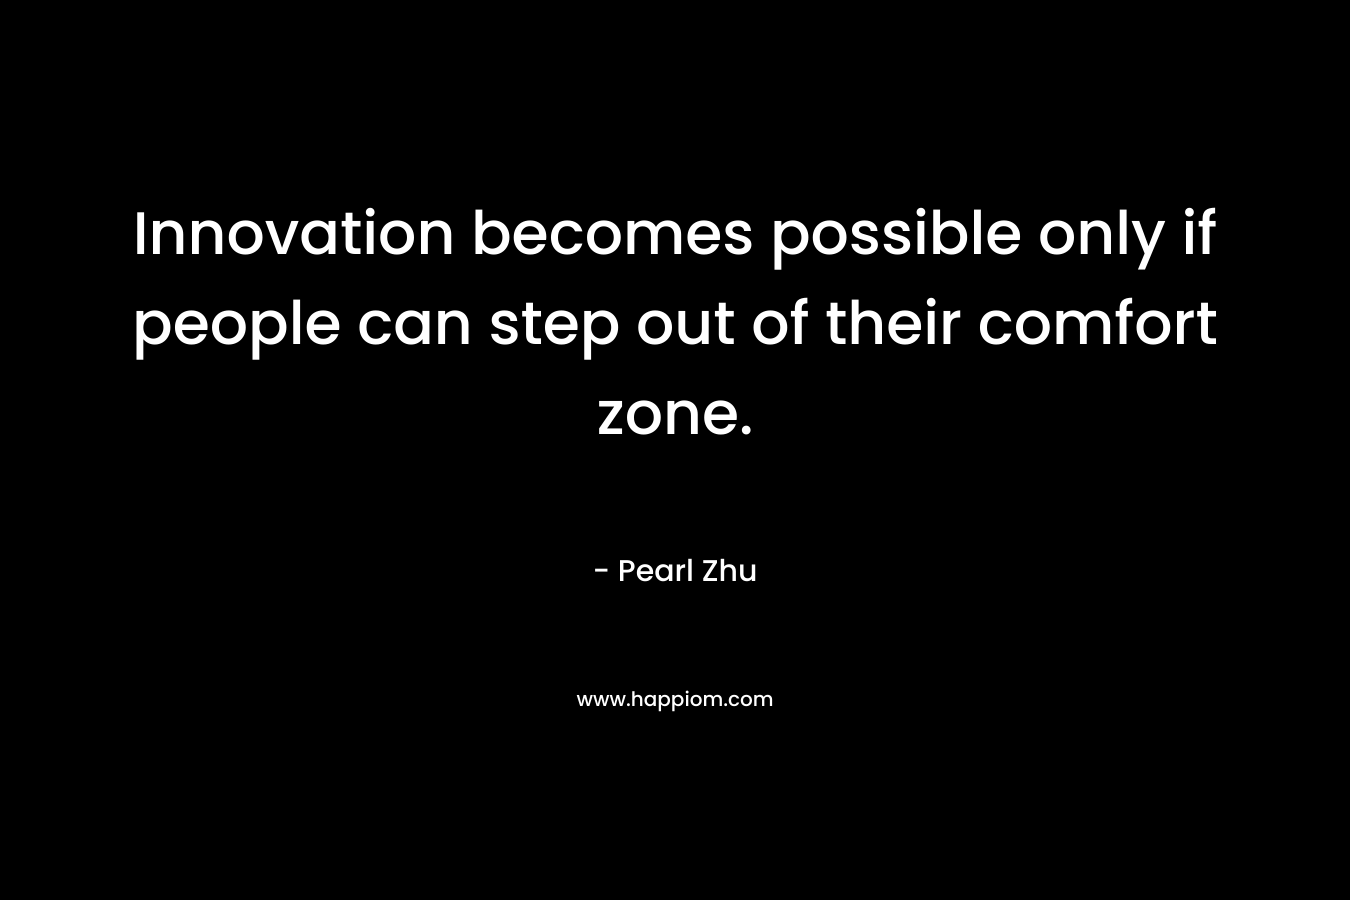 Innovation becomes possible only if people can step out of their comfort zone.